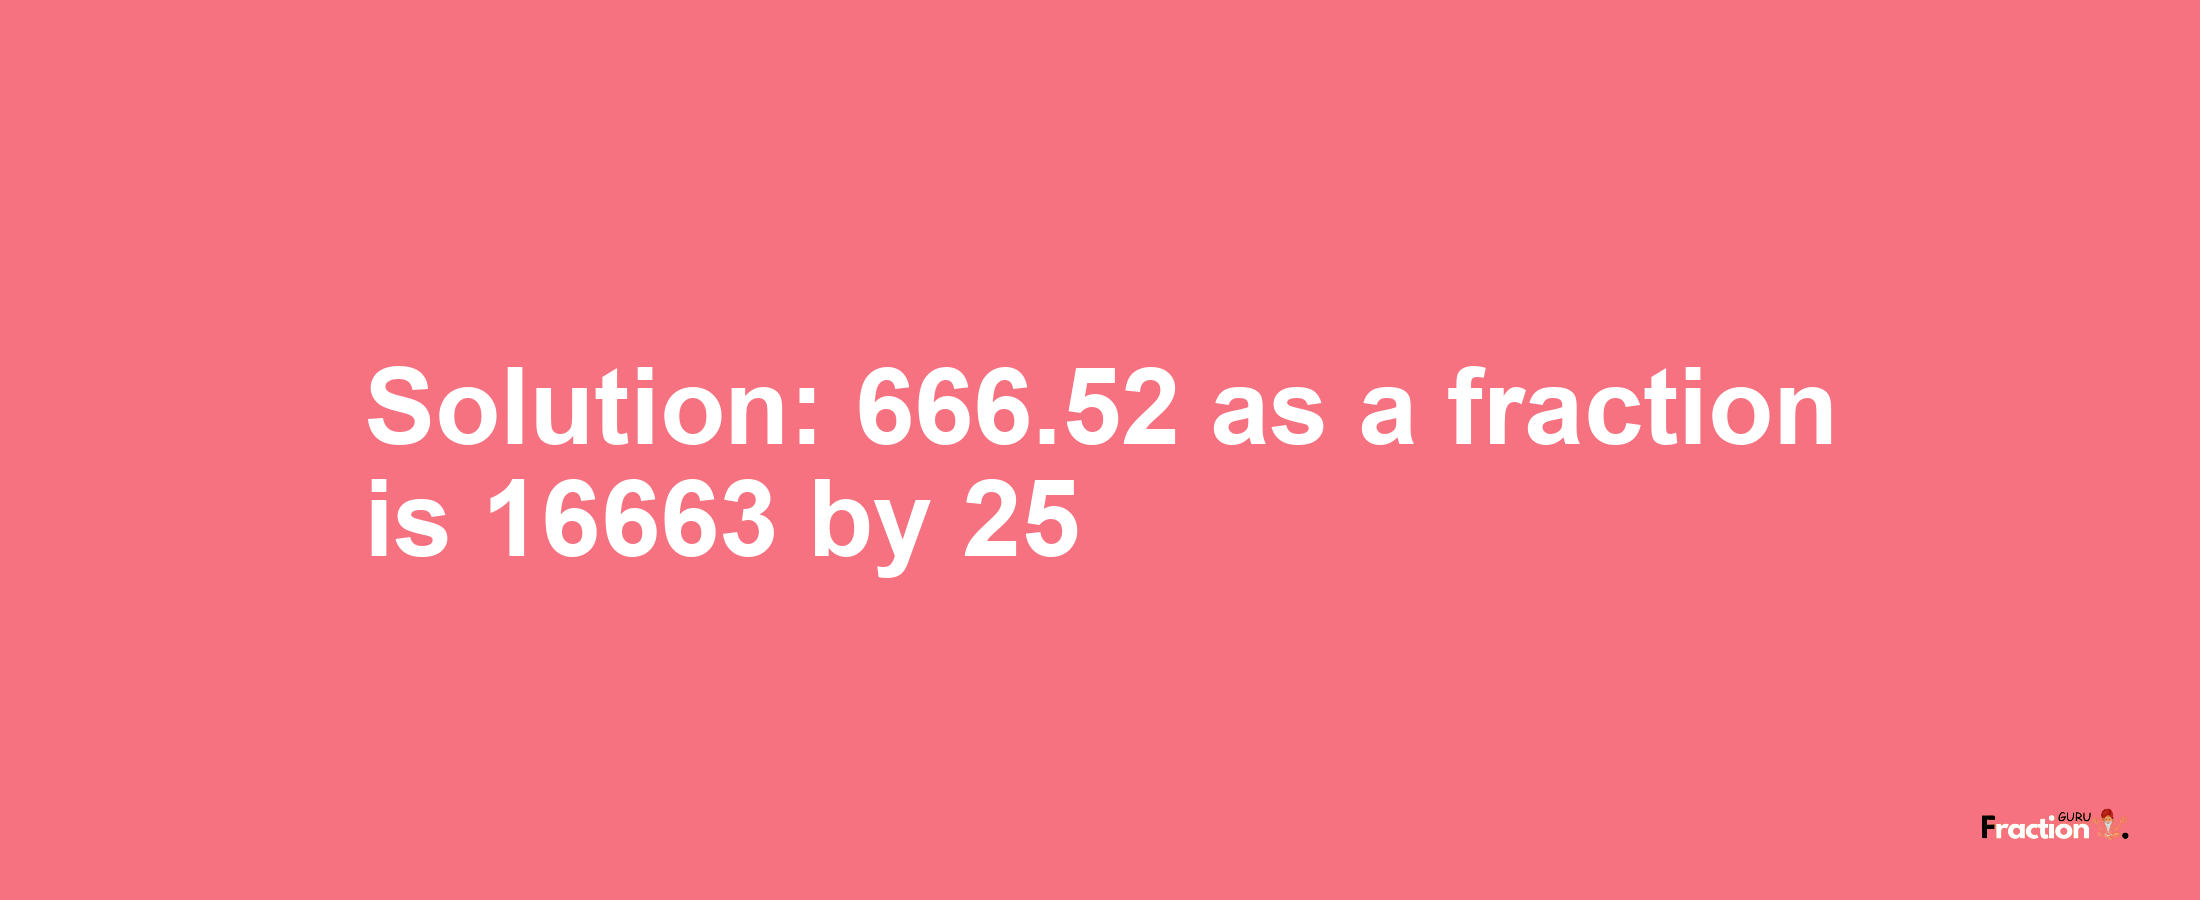 Solution:666.52 as a fraction is 16663/25